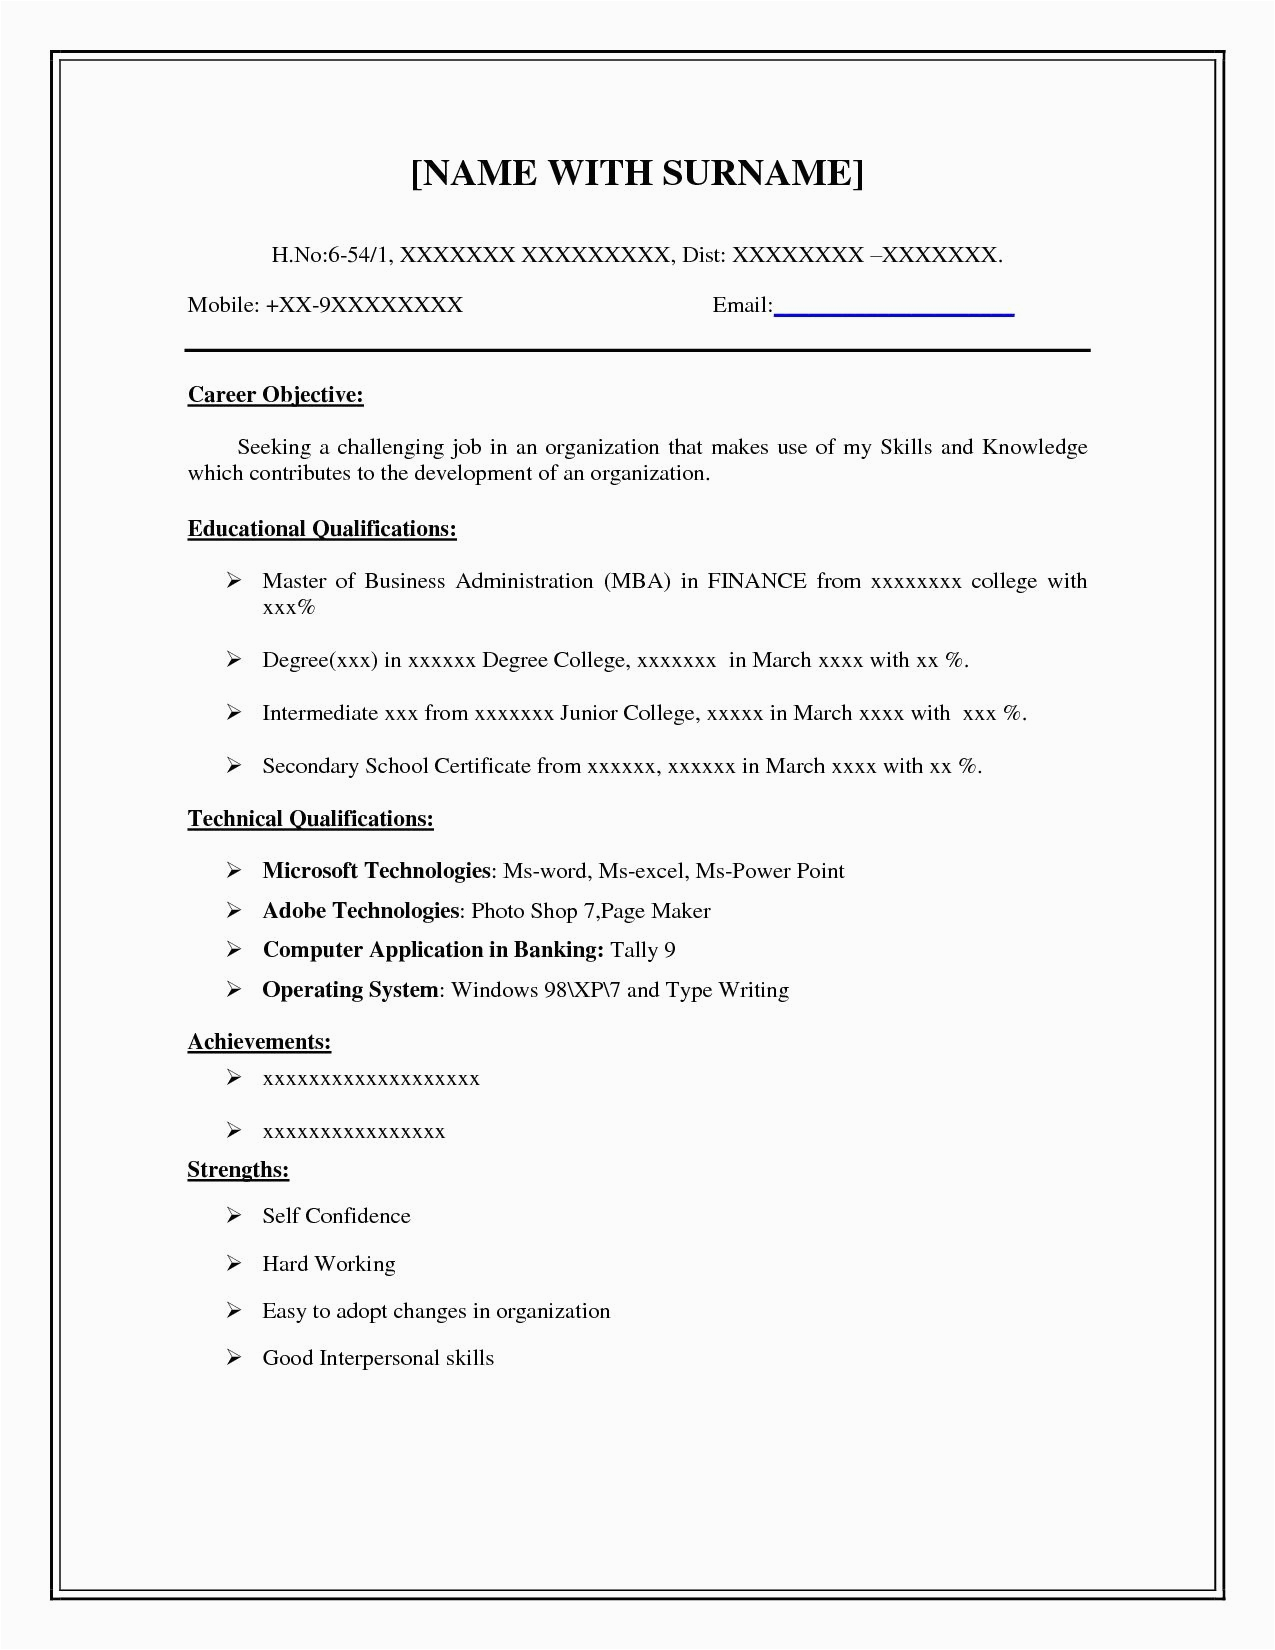 Free Easy to Use Resume Templates 12 Good Samples Basic Resume Template Easy Resume